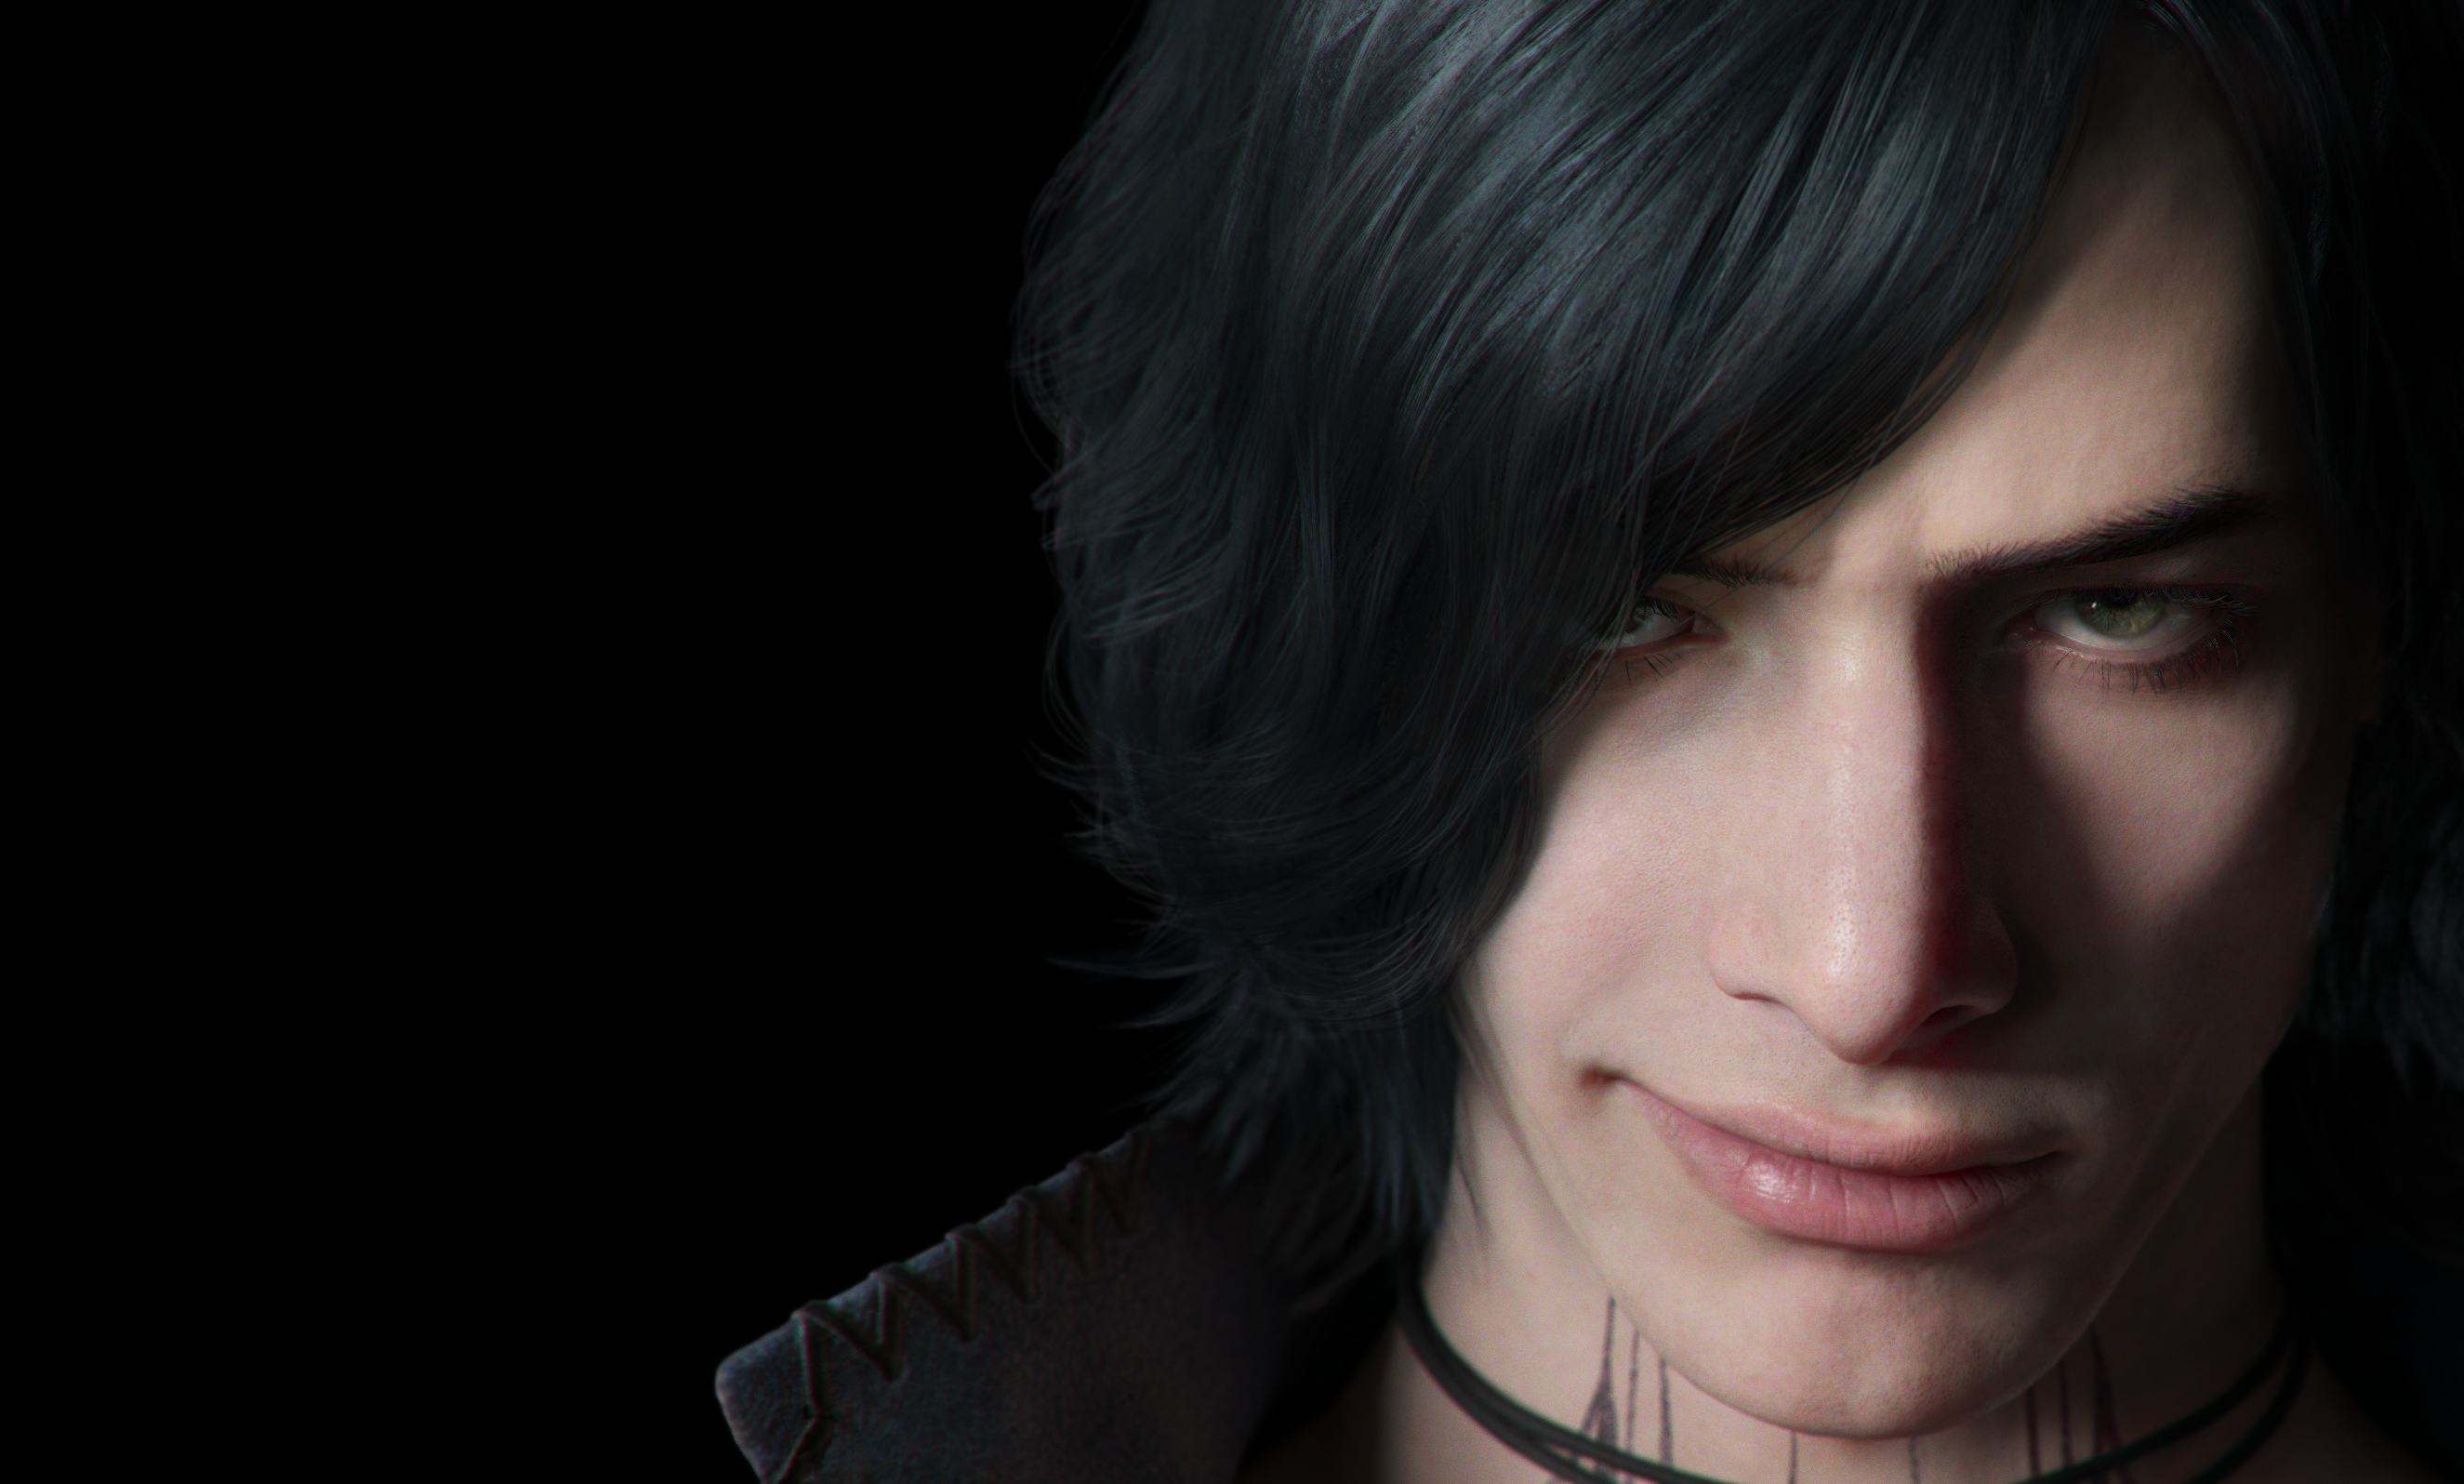 220+ Devil May Cry 5 HD Wallpapers and Backgrounds